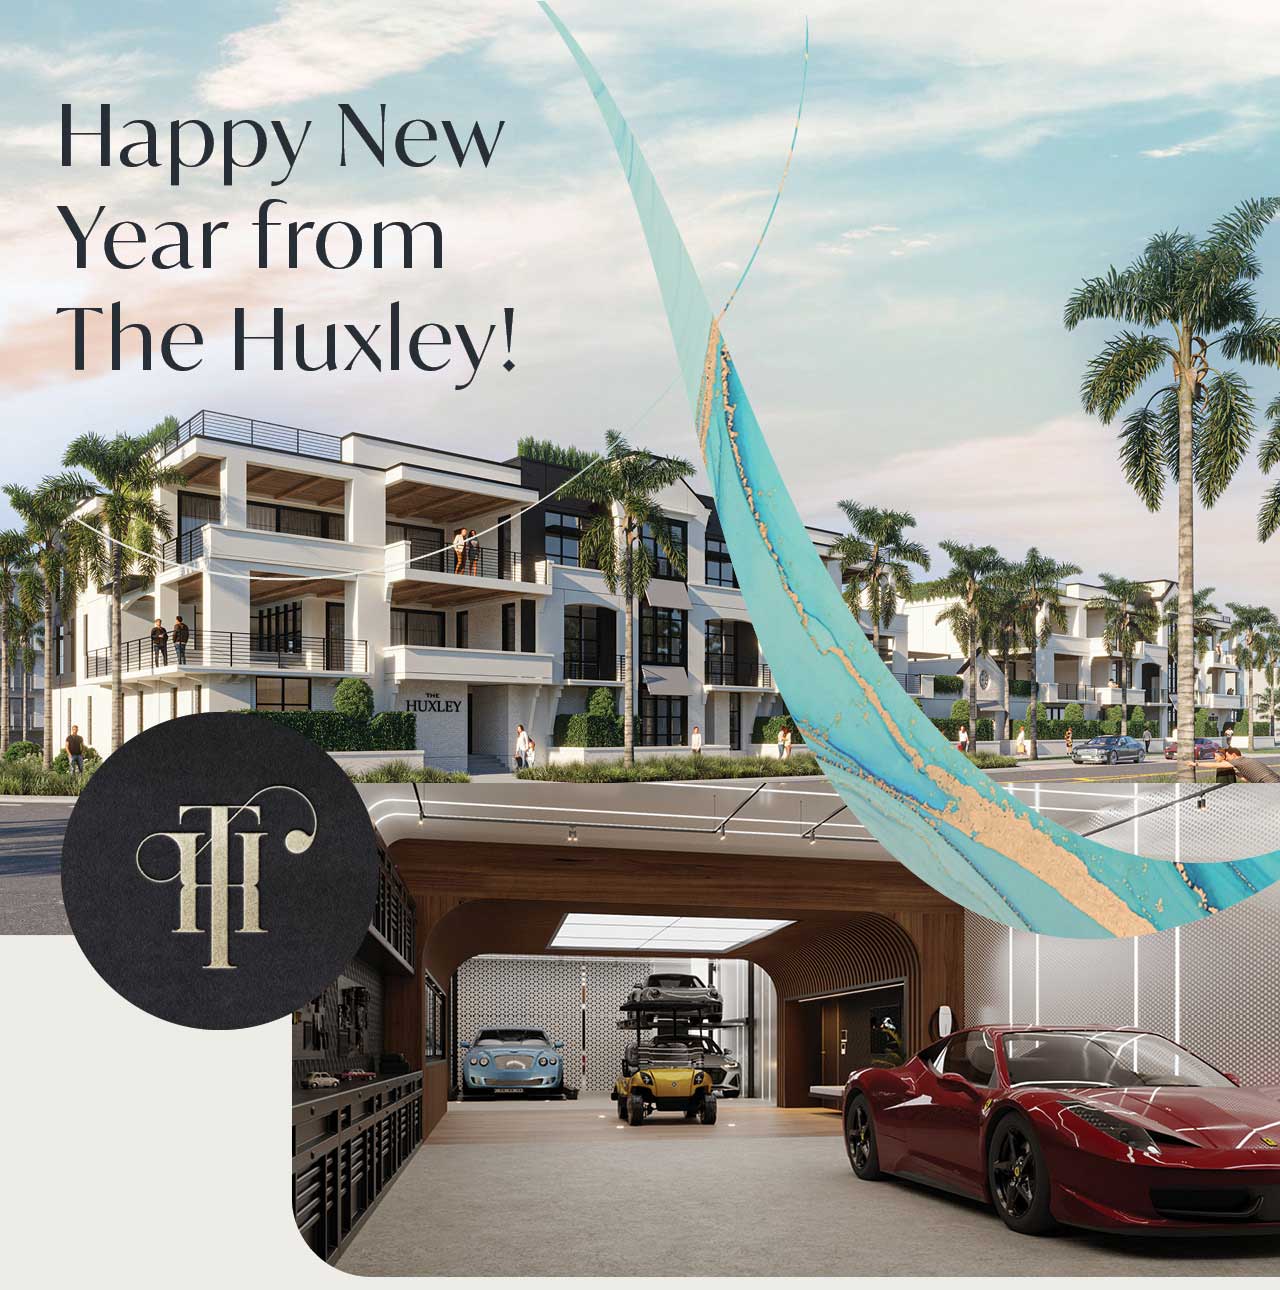 Happy New Year from The Huxley Naples